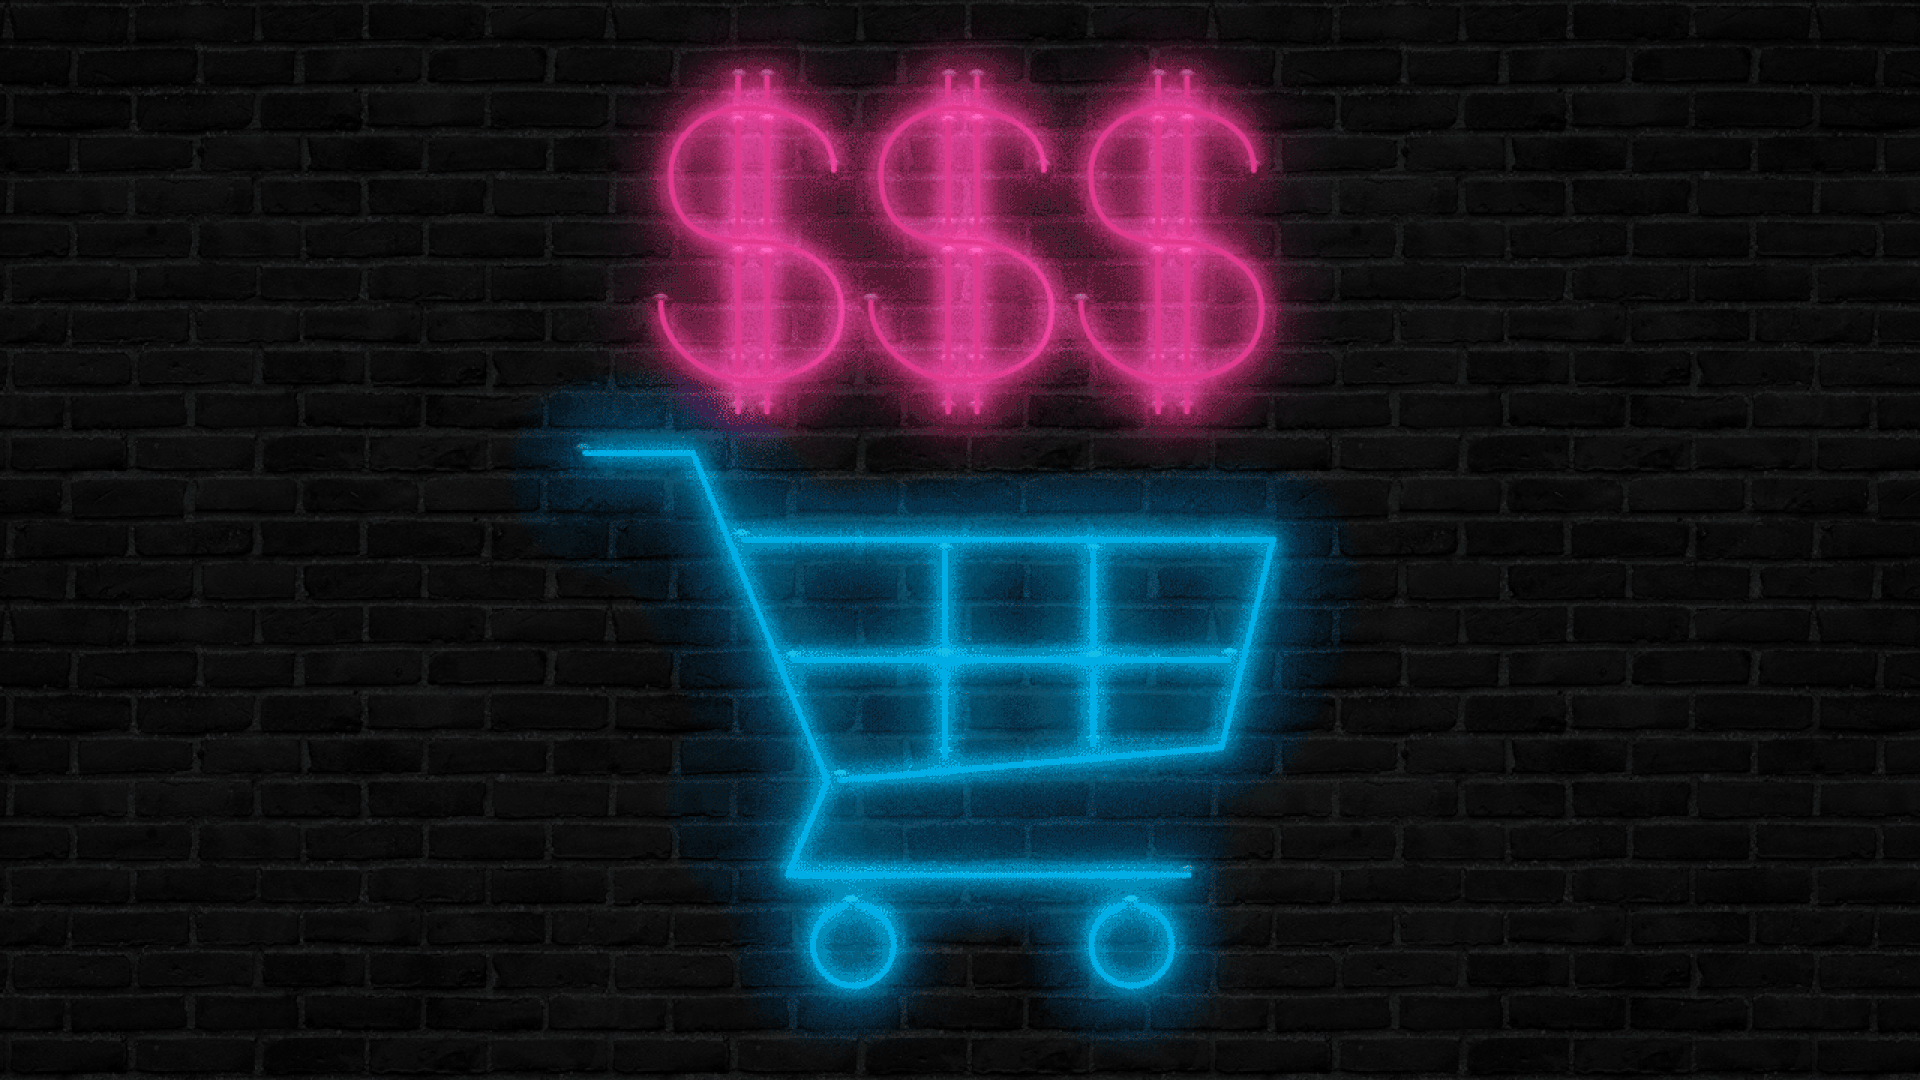 Animated Axios giphy with shopping cart and dollar signs above it flashing pink and blue